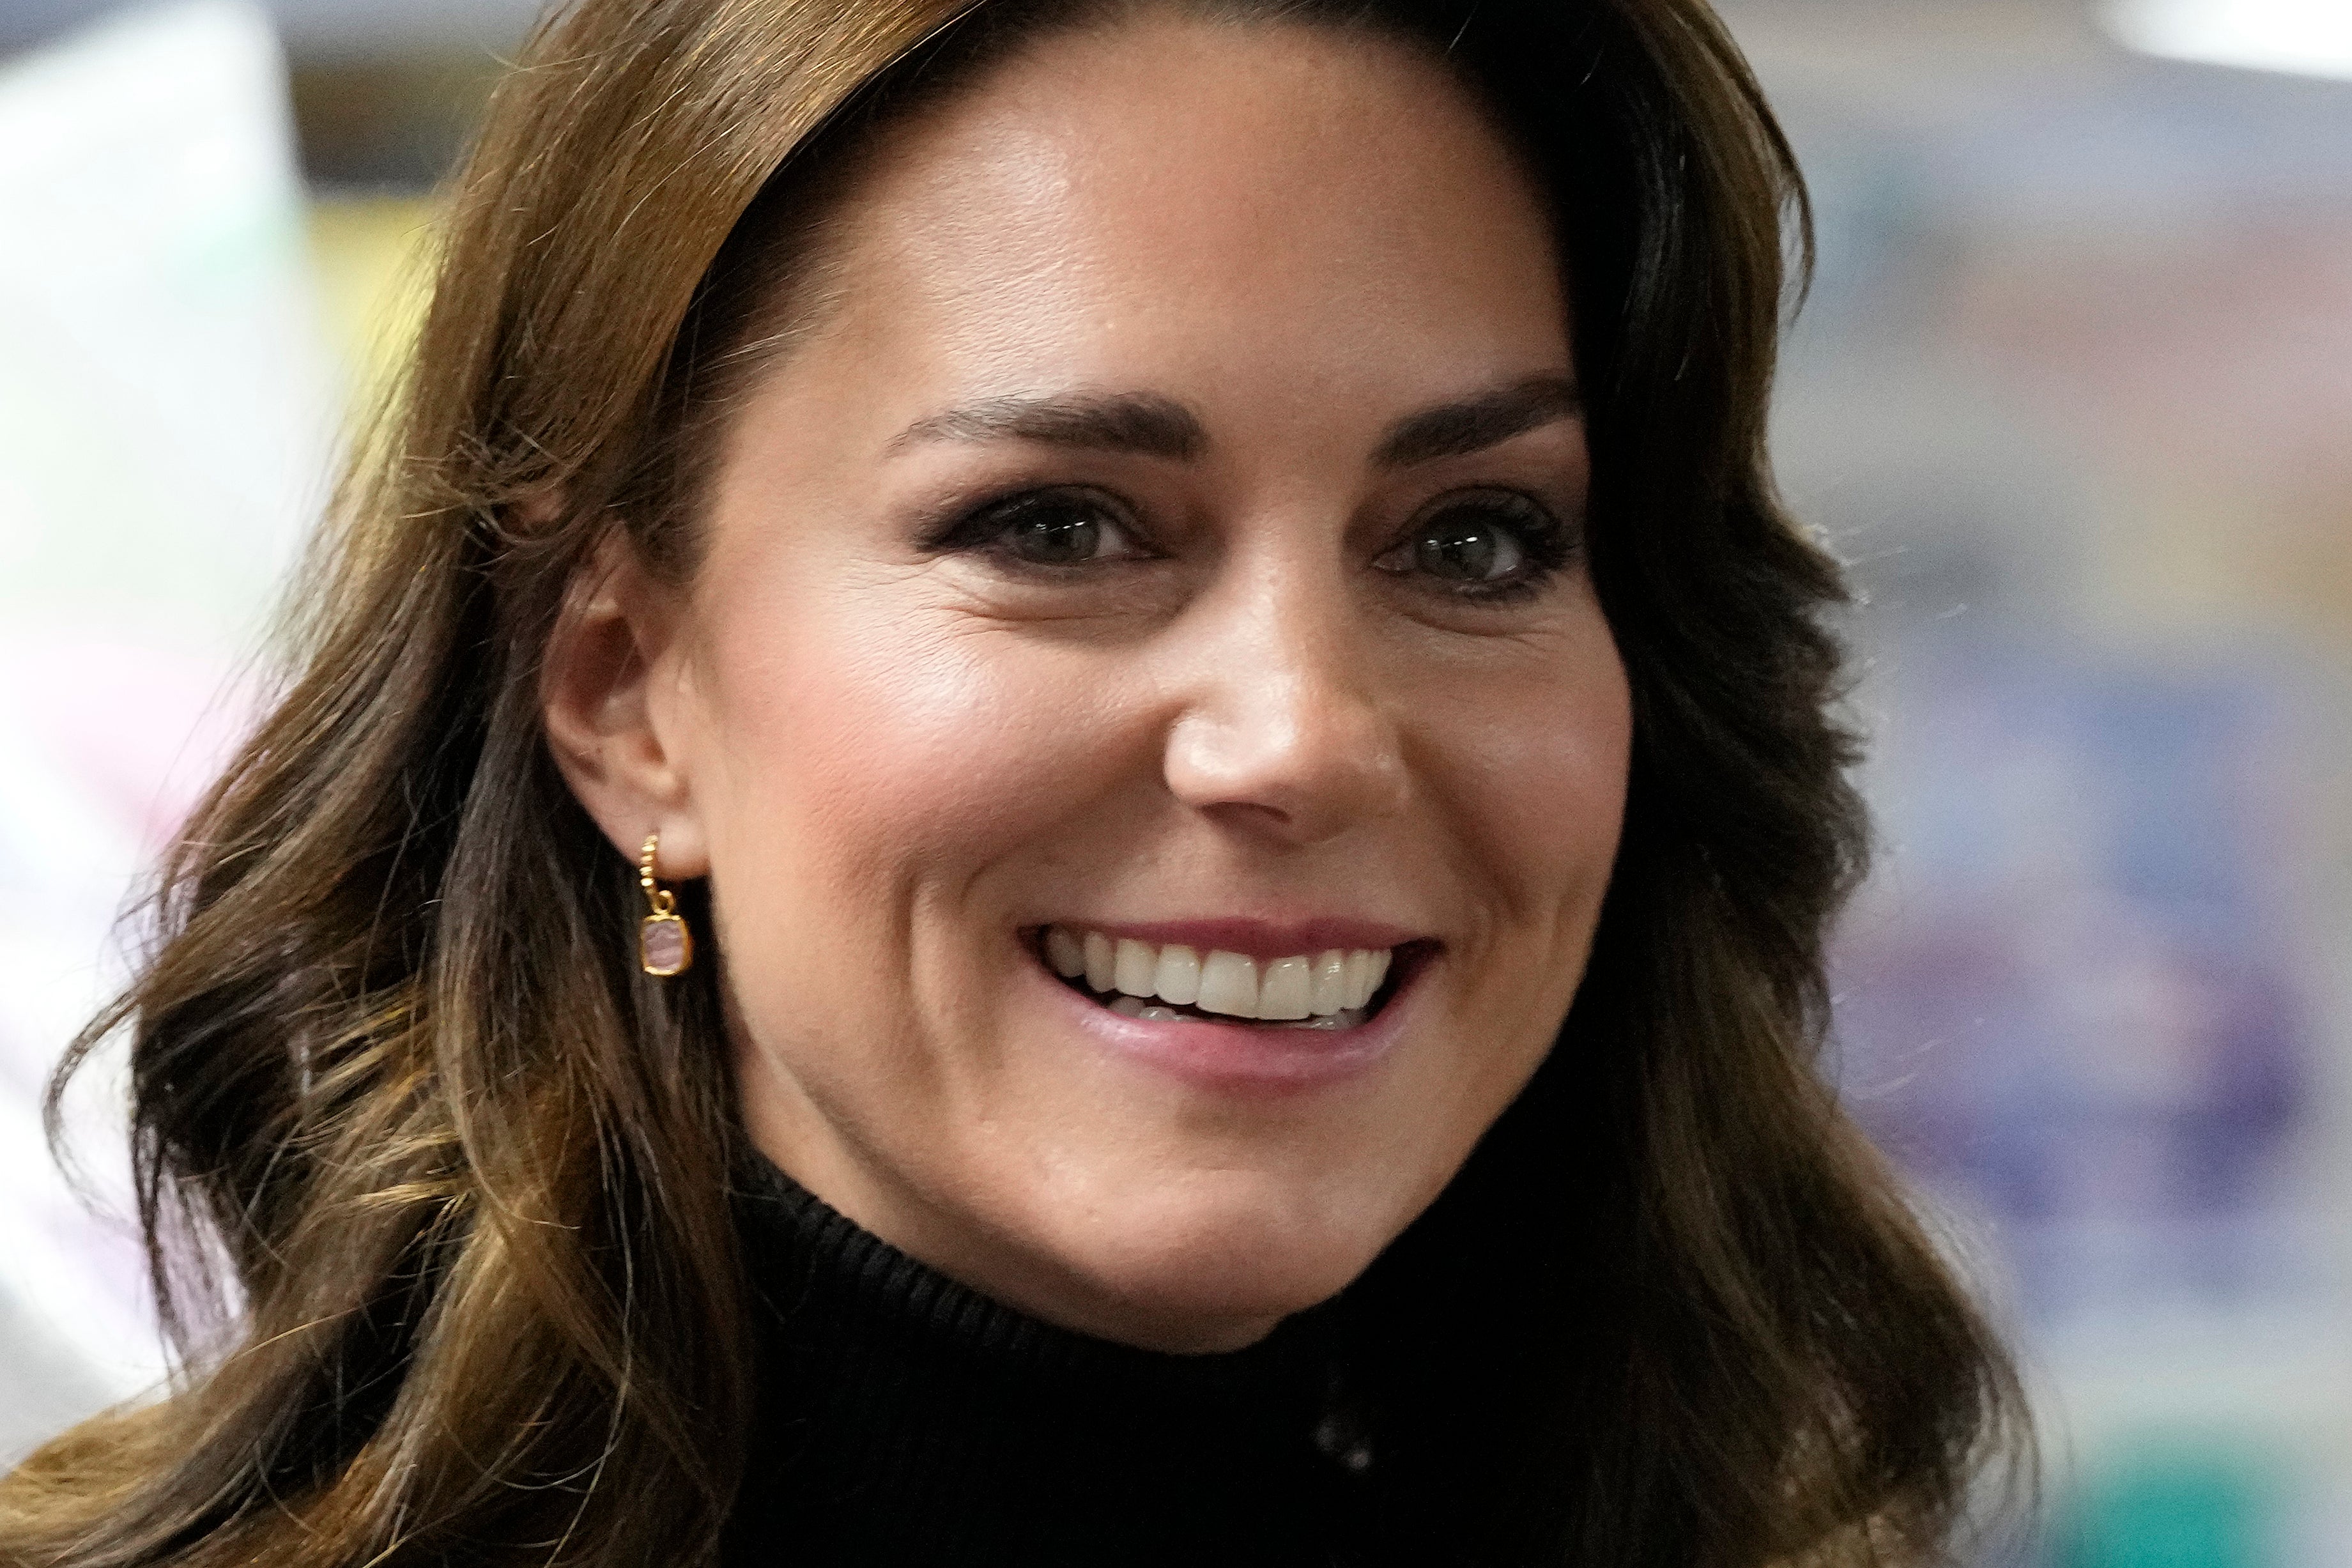 Kate’s absence from the public eye has led to increasingly absurd online speculation